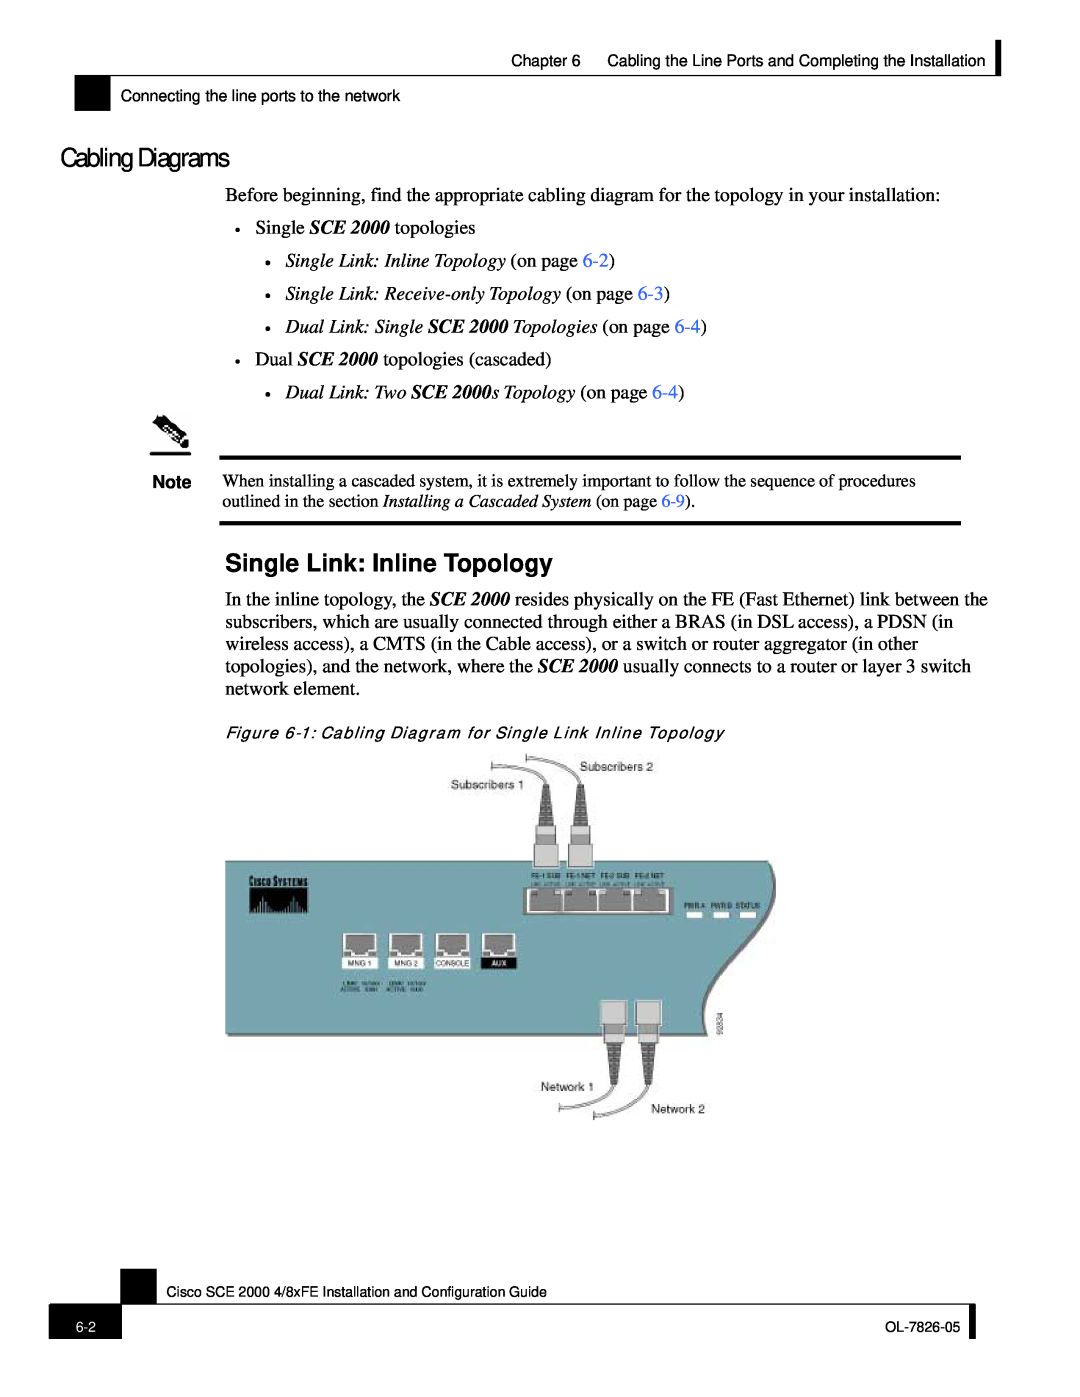 Cisco Systems SCE 2000 4/8xFE manual Cabling Diagrams, Single Link Inline Topology on page 